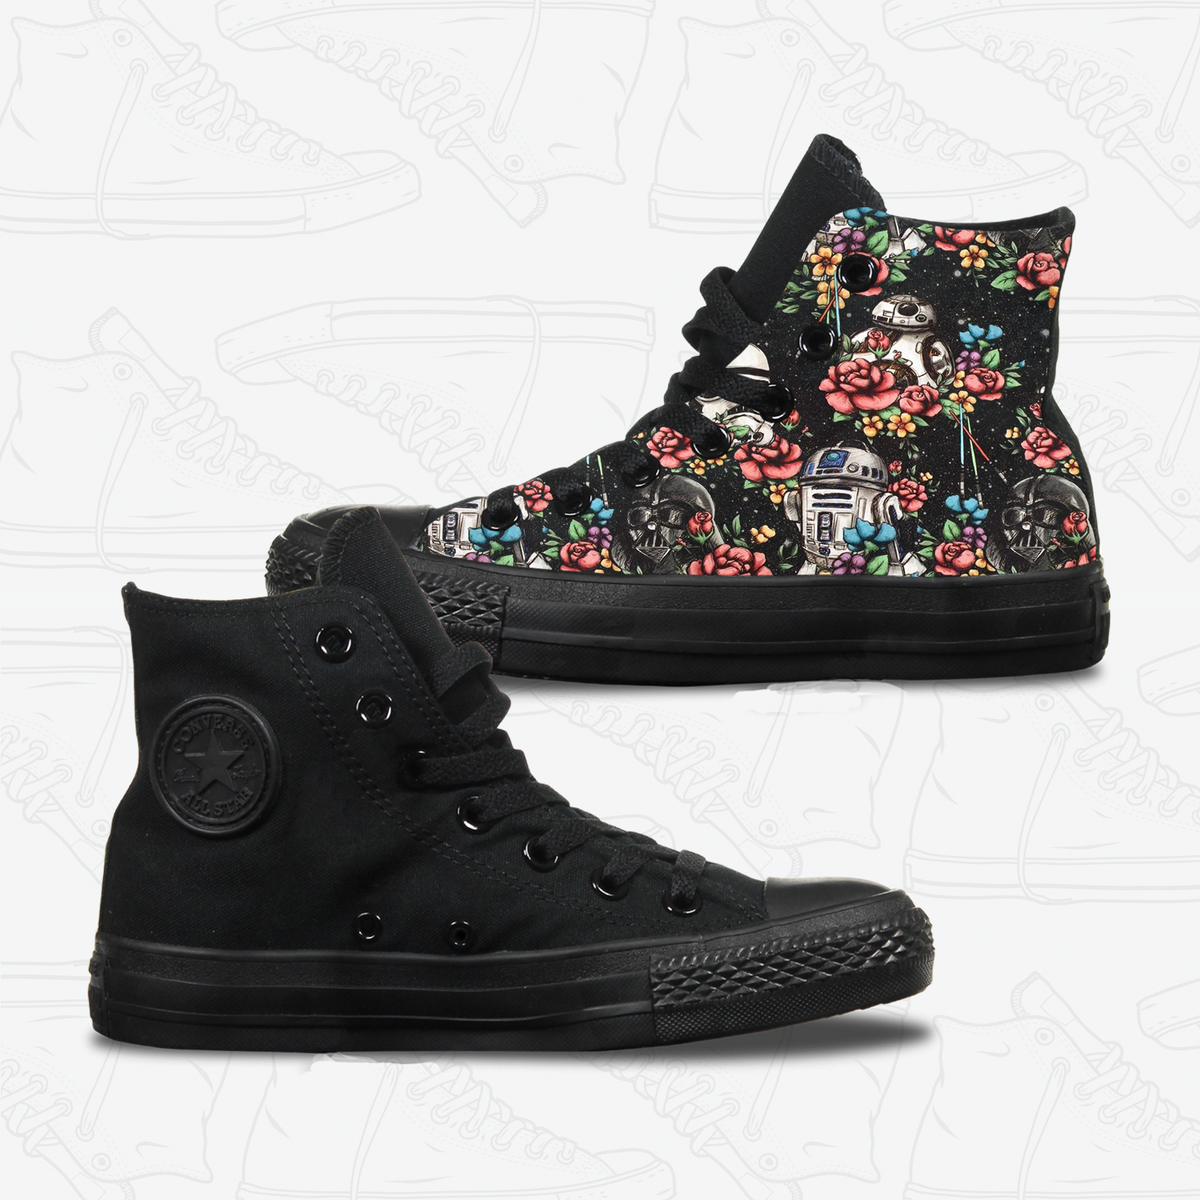 Adult Star Wars Floral Converse